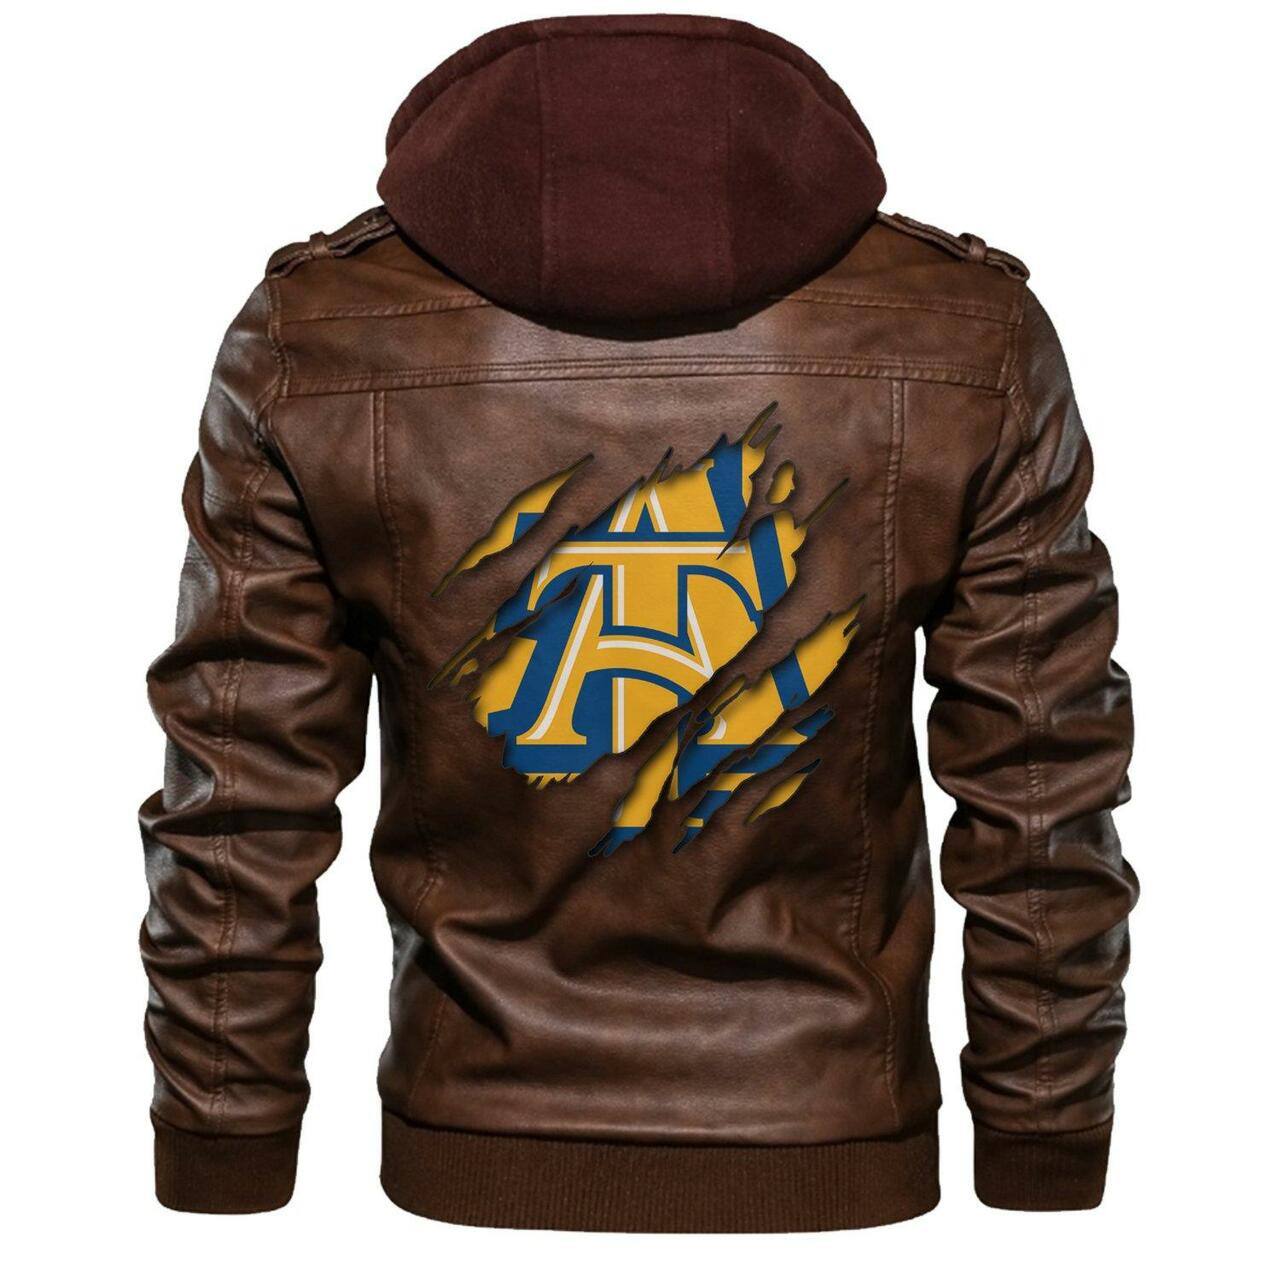 Our store has all of the latest leather jacket 120